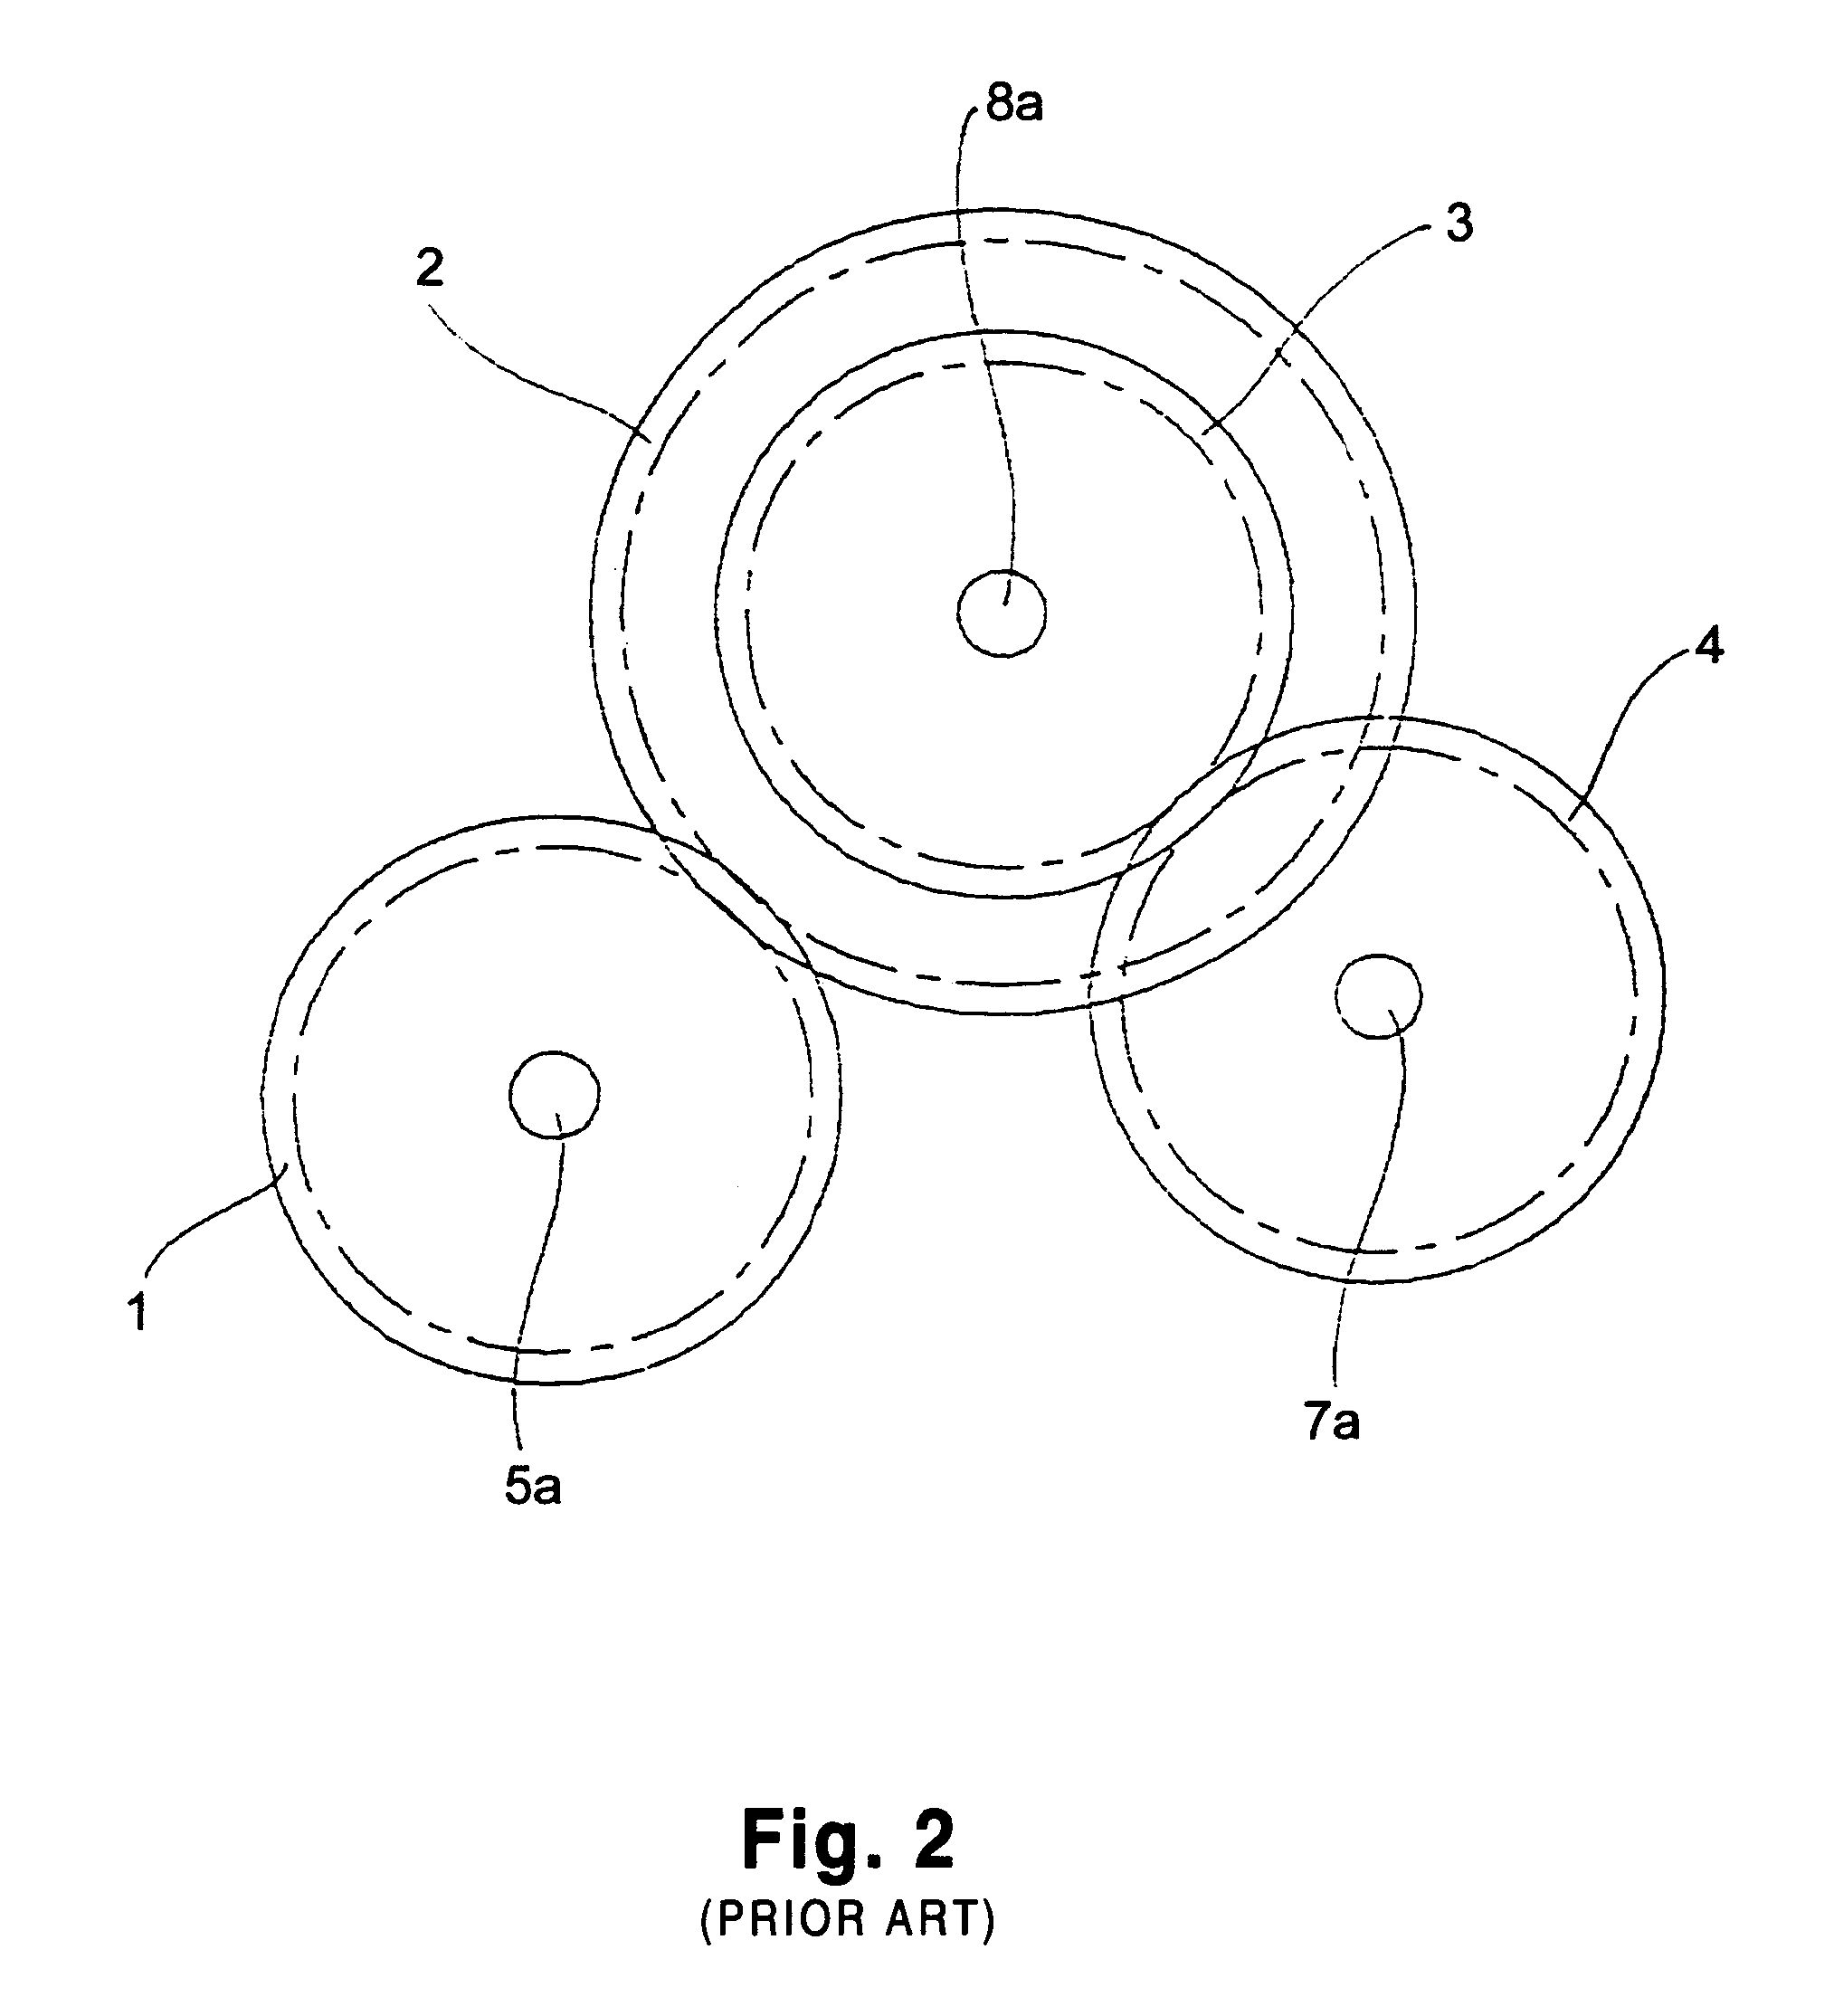 Drum assembly having helical gear and spur gear spaced therebetween for use in printer